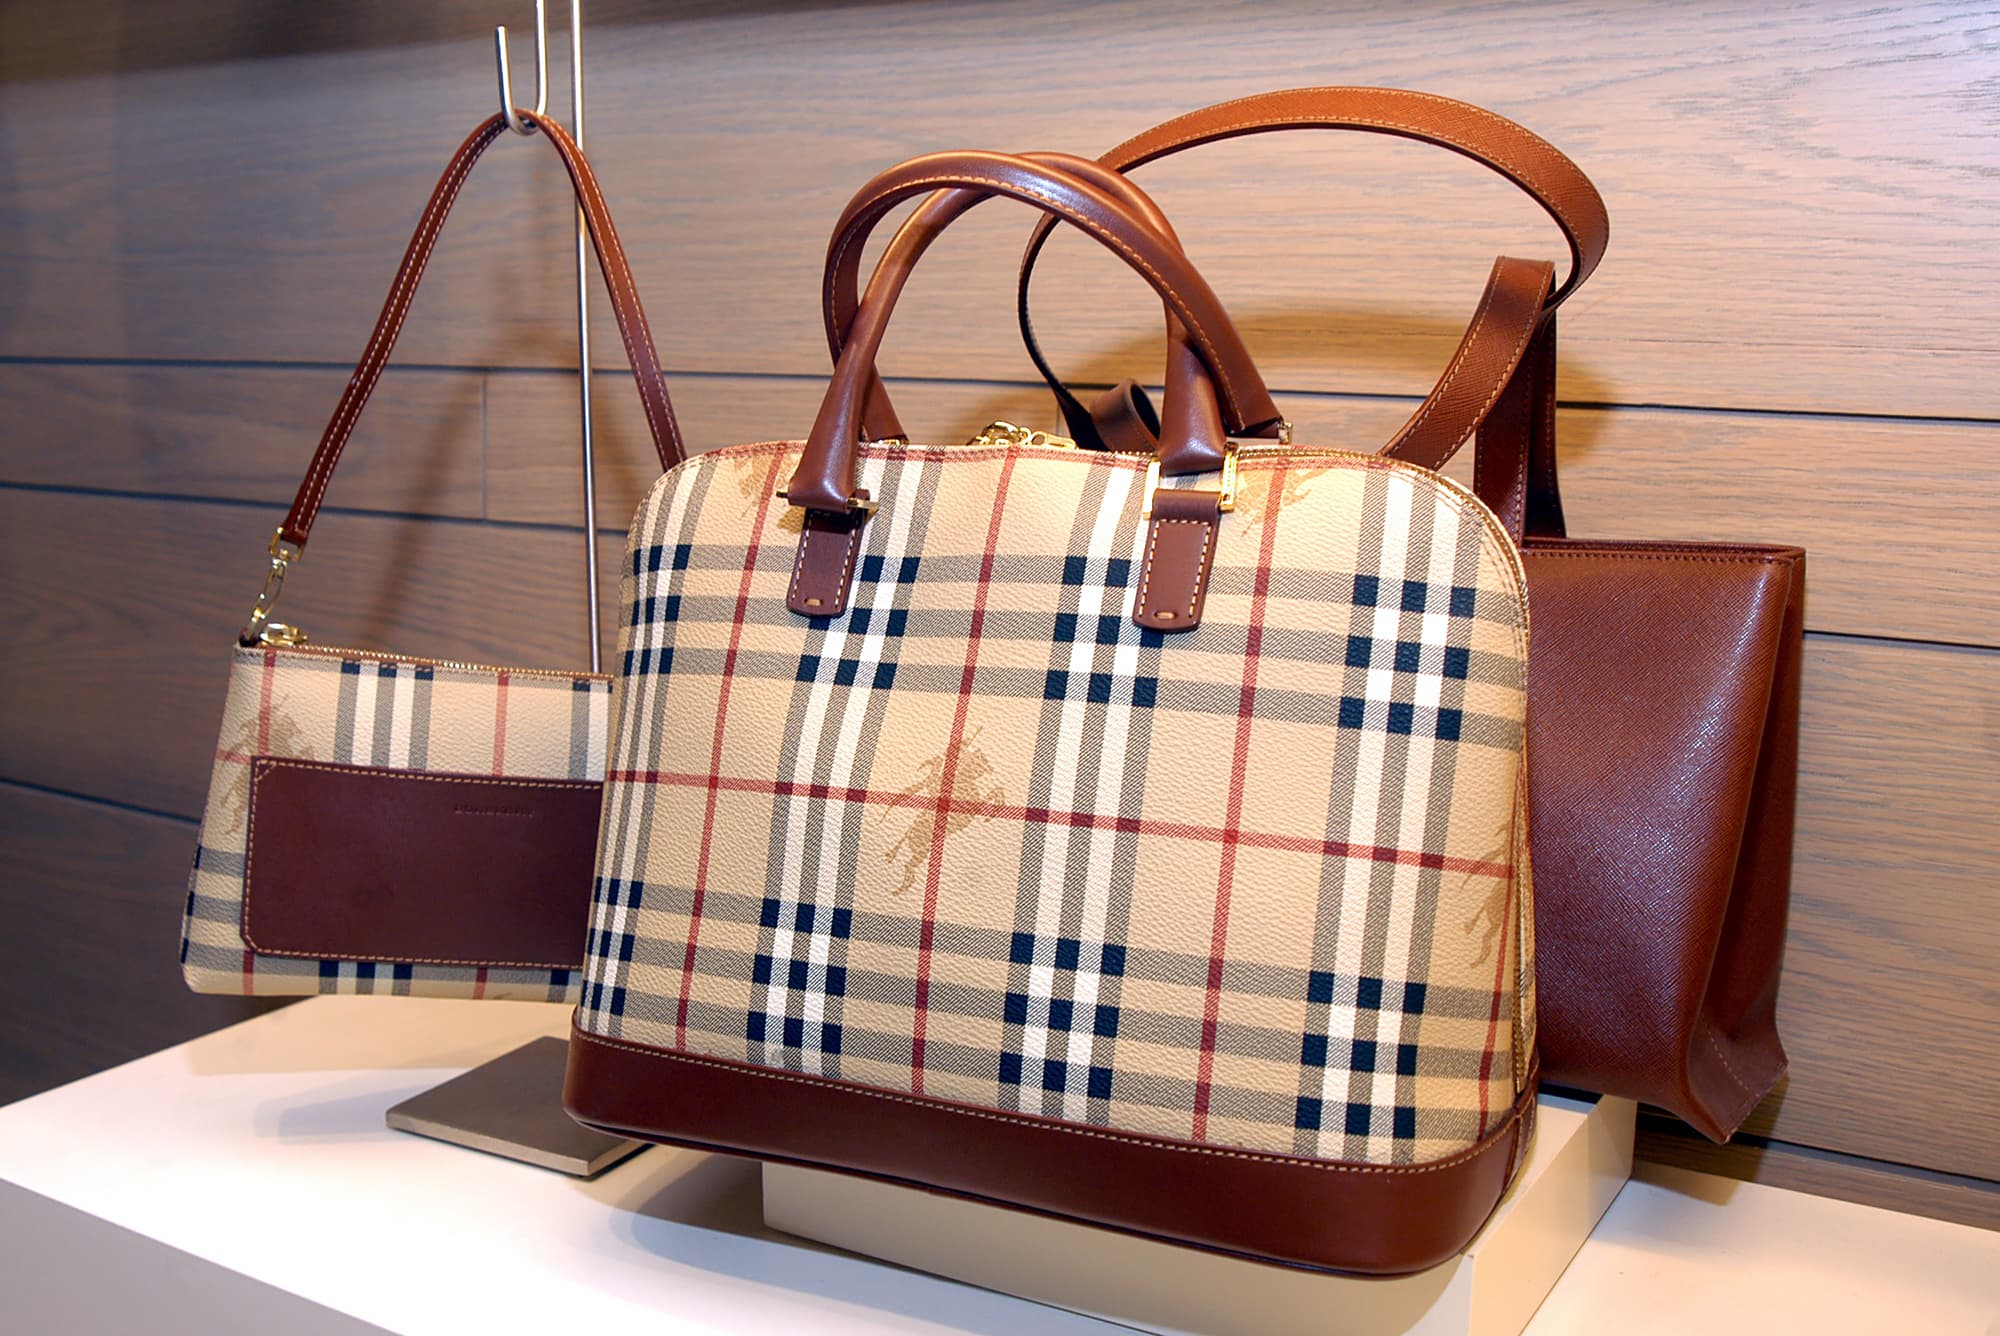 Burberry profits up in 'difficult' environment